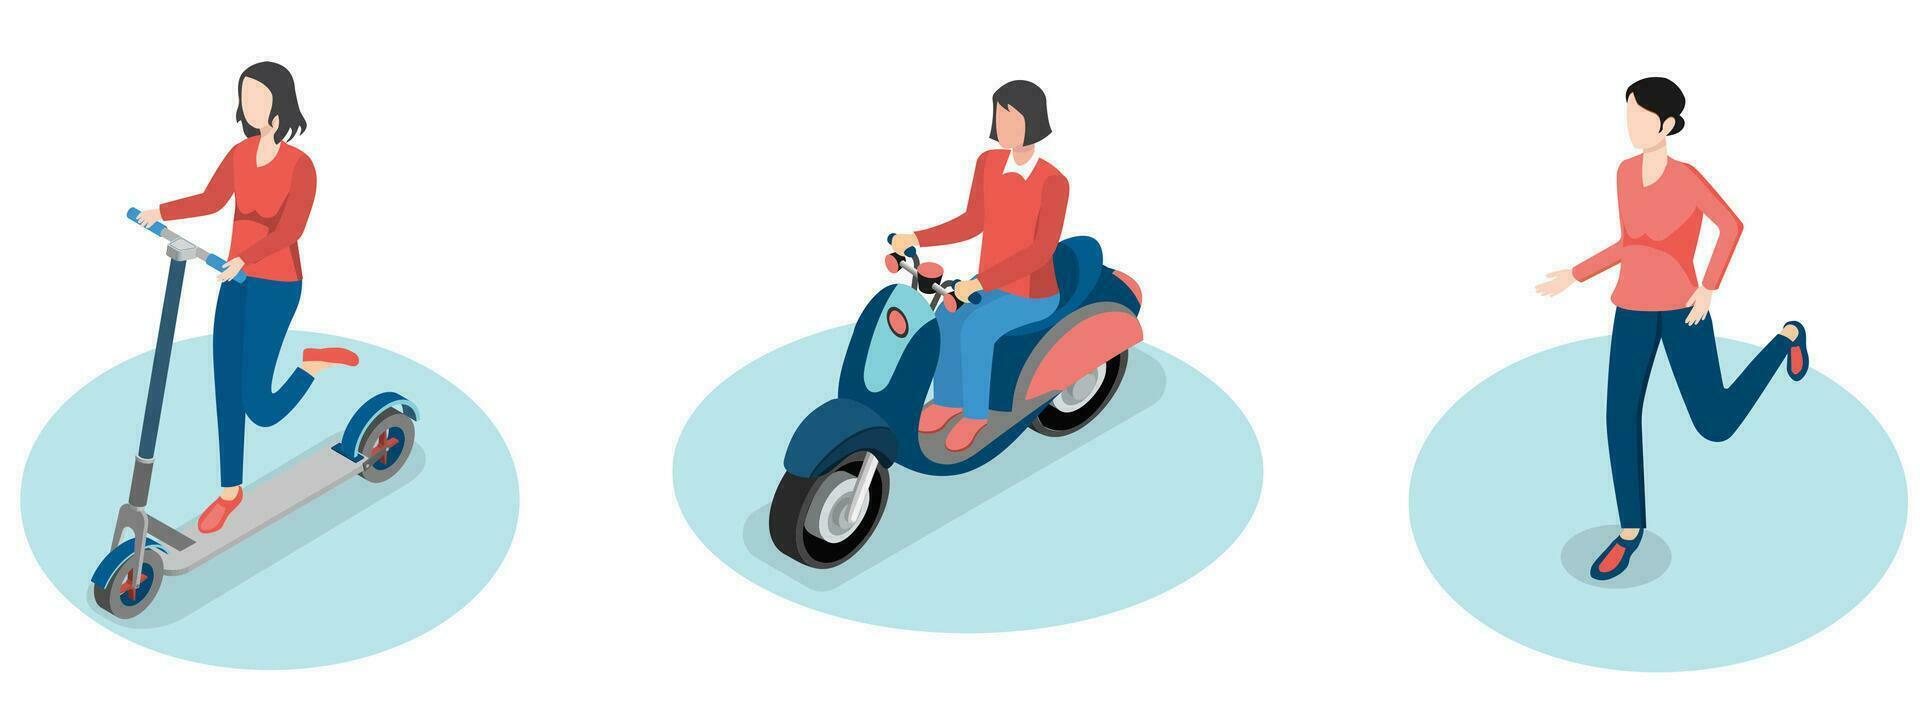 3D isometric set of women riding scooters,  motorcycle and running concept. Isolated on white background. Vector illustration eps10